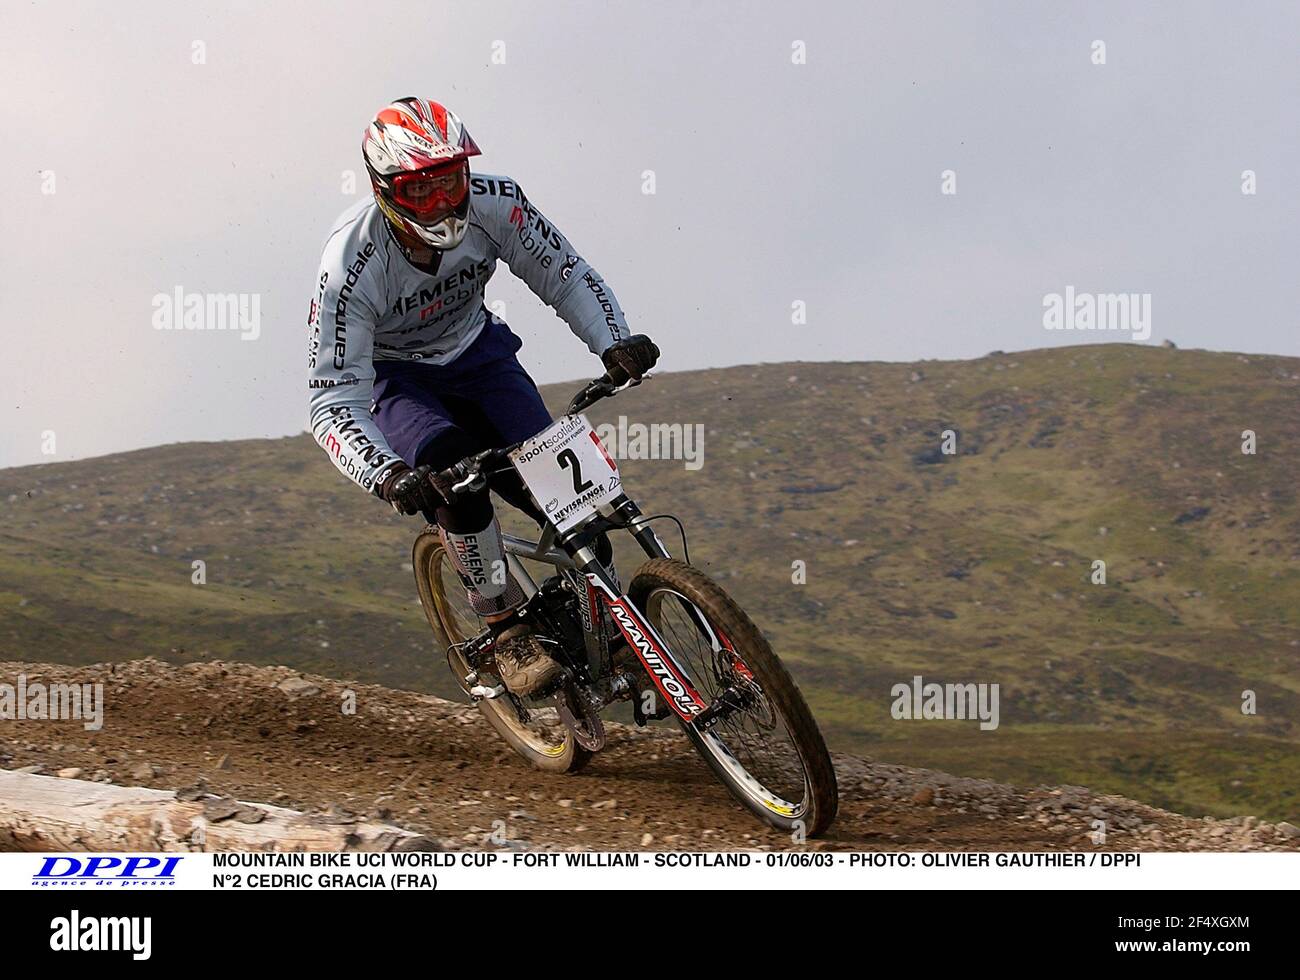 MOUNTAIN BIKE UCI WORLD CUP - FORT WILLIAM - SCOTLAND - 01/06/03 - PHOTO:  OLIVIER GAUTHIER / DPPI N°2 CEDRIC GRACIA (FRA Stock Photo - Alamy